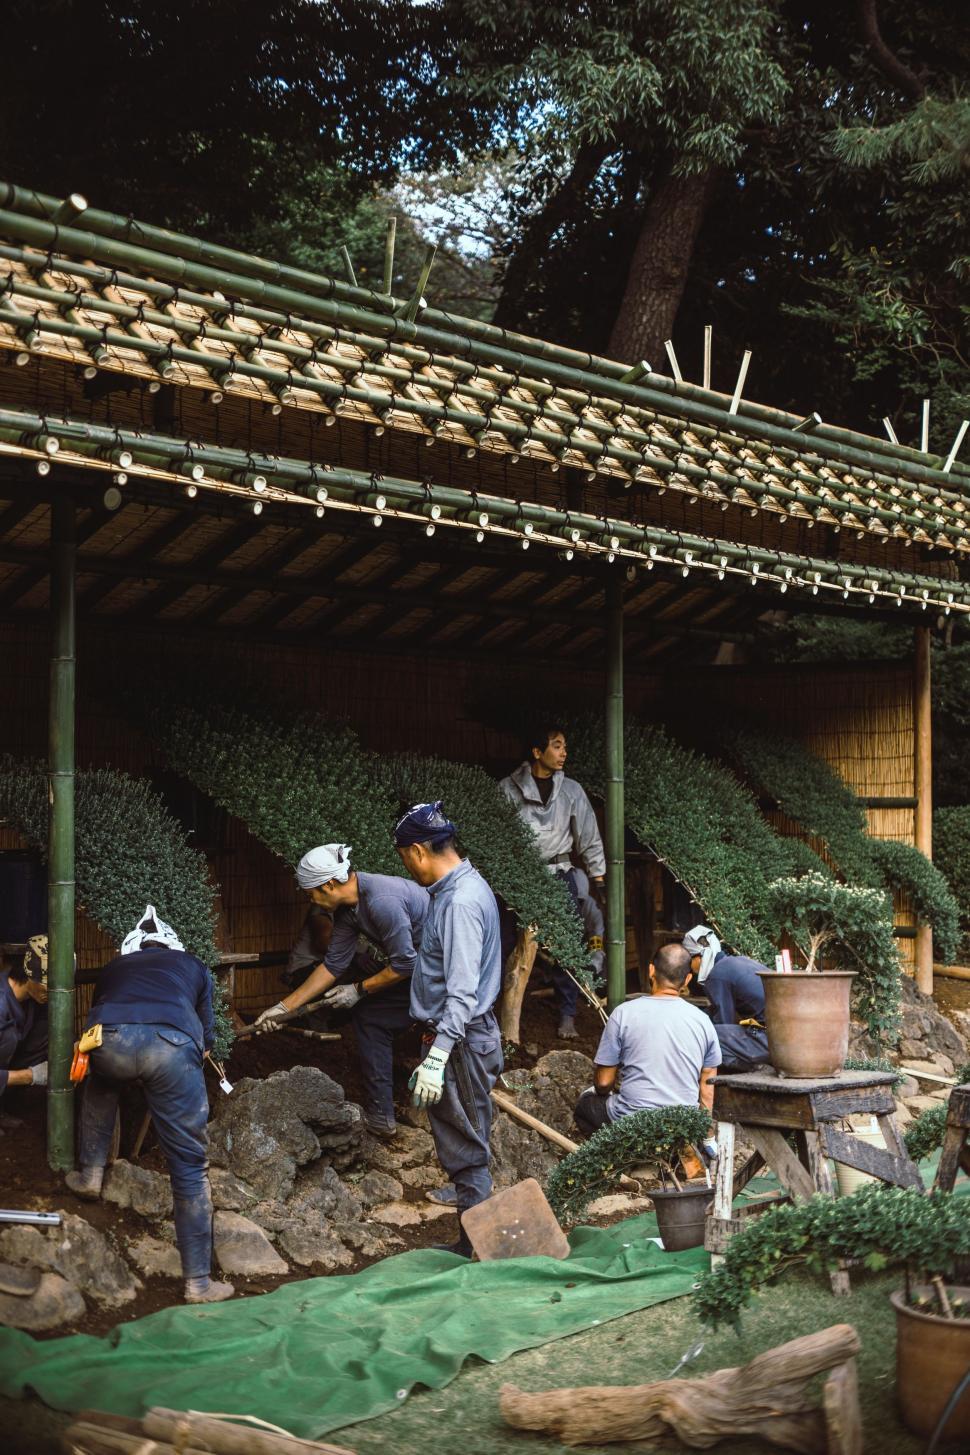 Free Image of Men Working Together in a Garden 